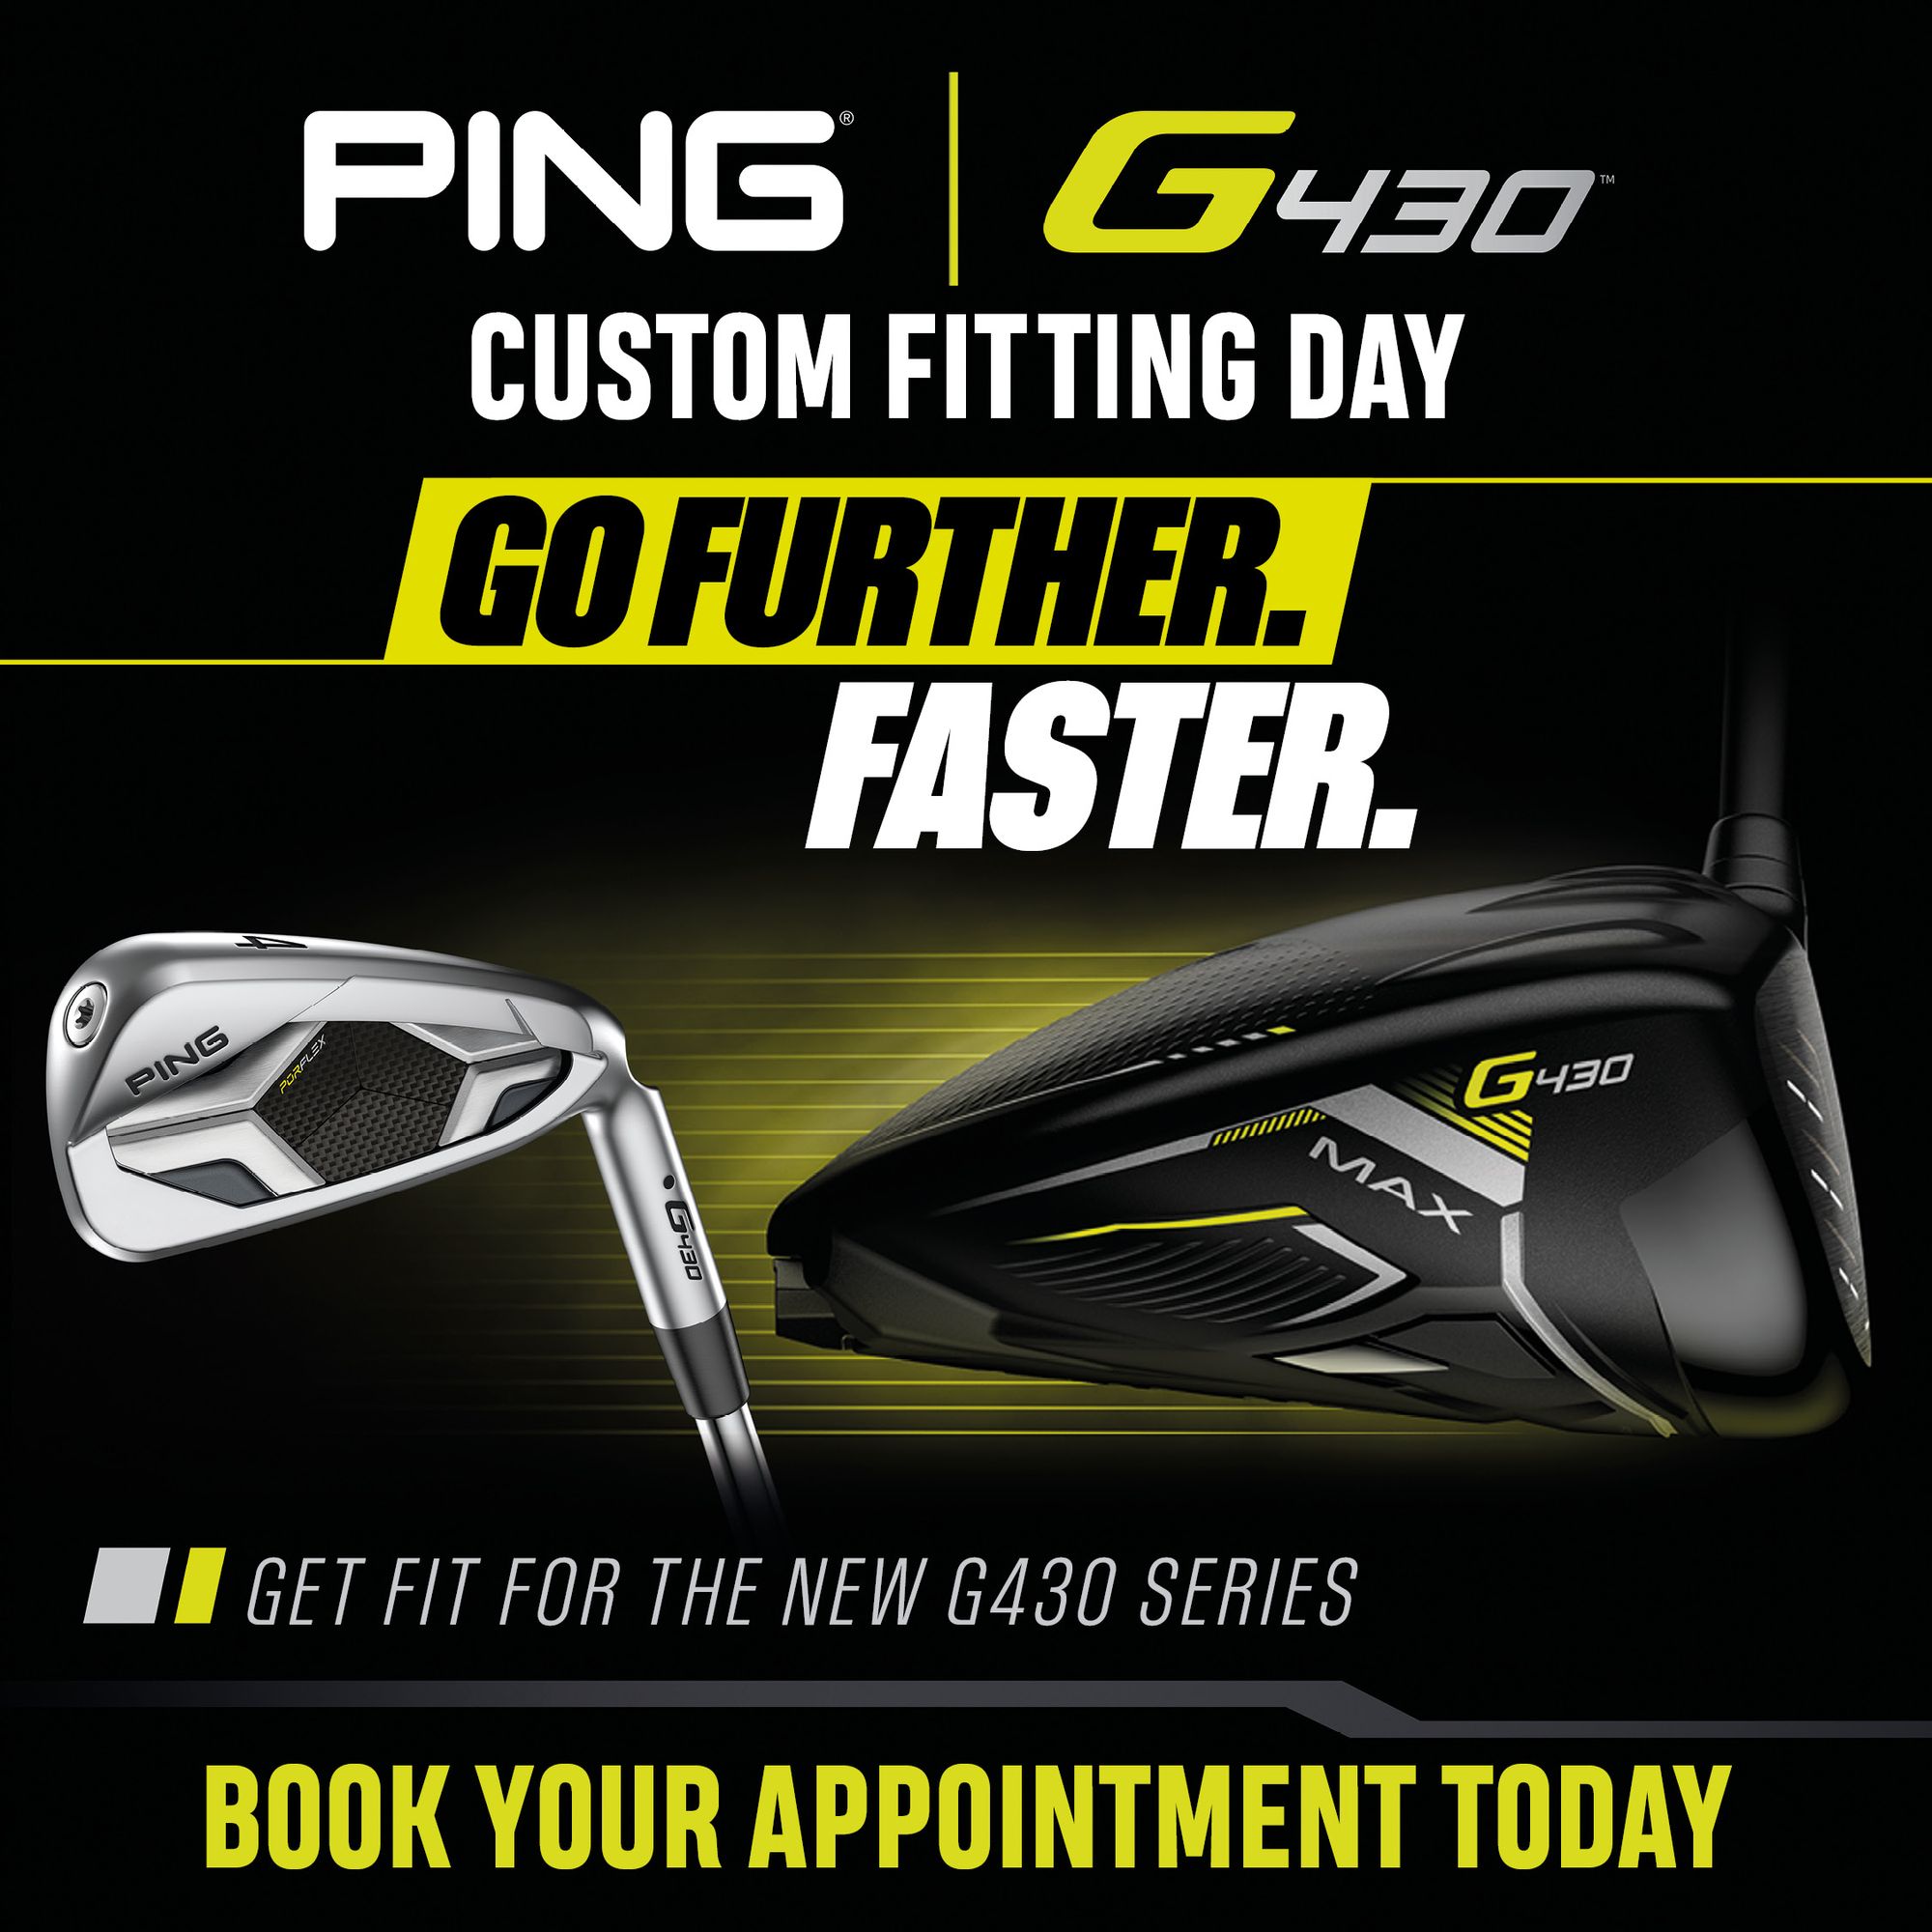 Ping golf fitting day at Queenstown Harbor